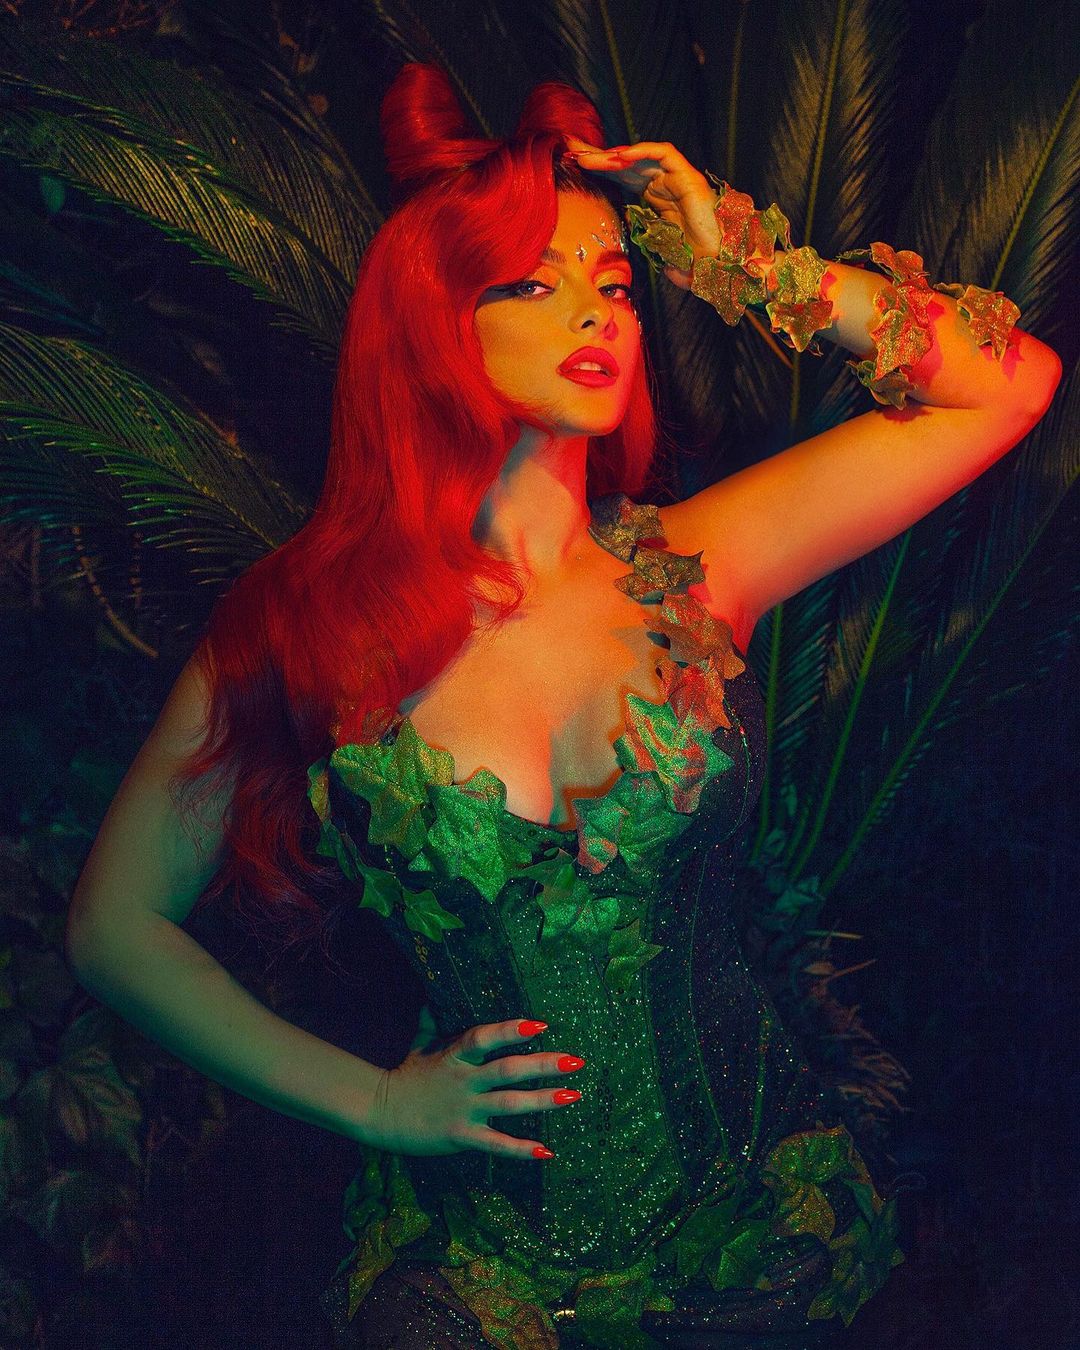 Who Did Poison Ivy Better – Bebe Rehxa or Bella Hadid? - Photo 2